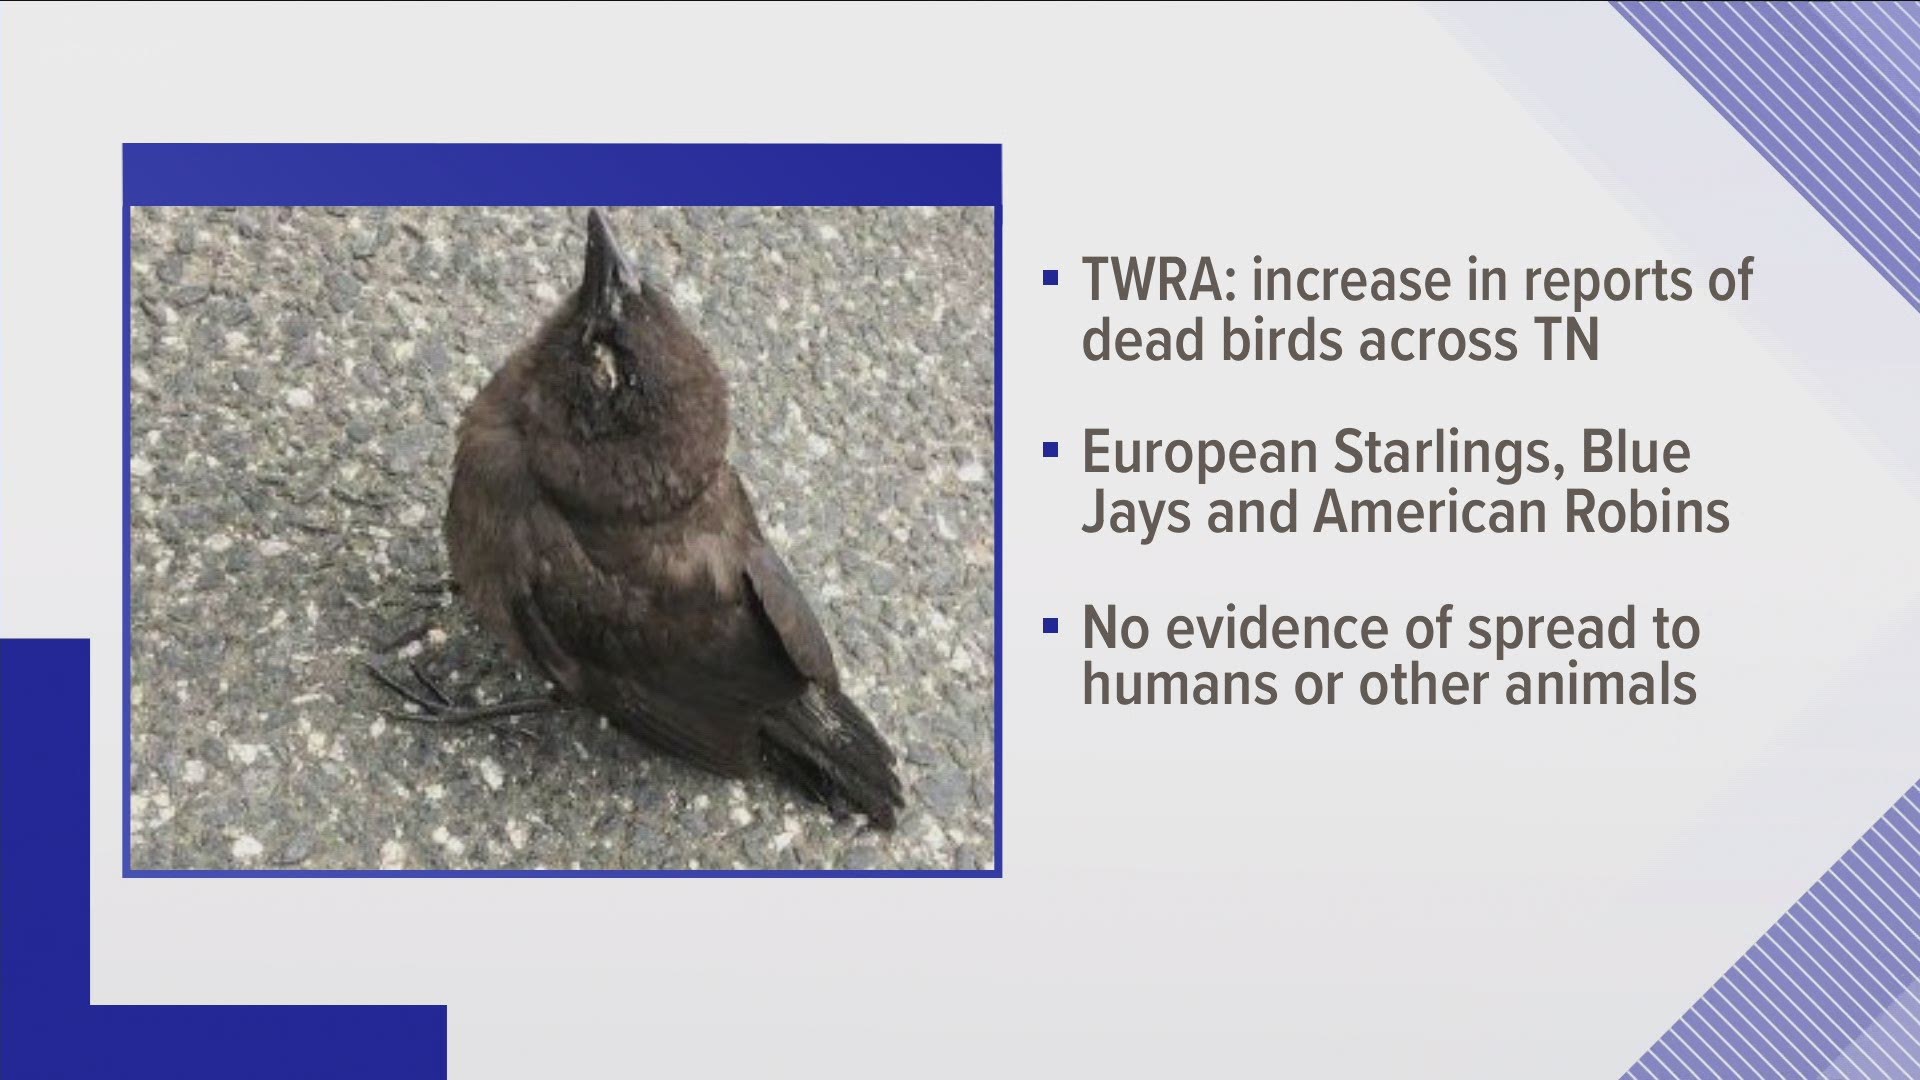 The disease causes eye swelling and crusty discharge from the eyes of birds and may also be associated with neurological symptoms, according to TWRA.